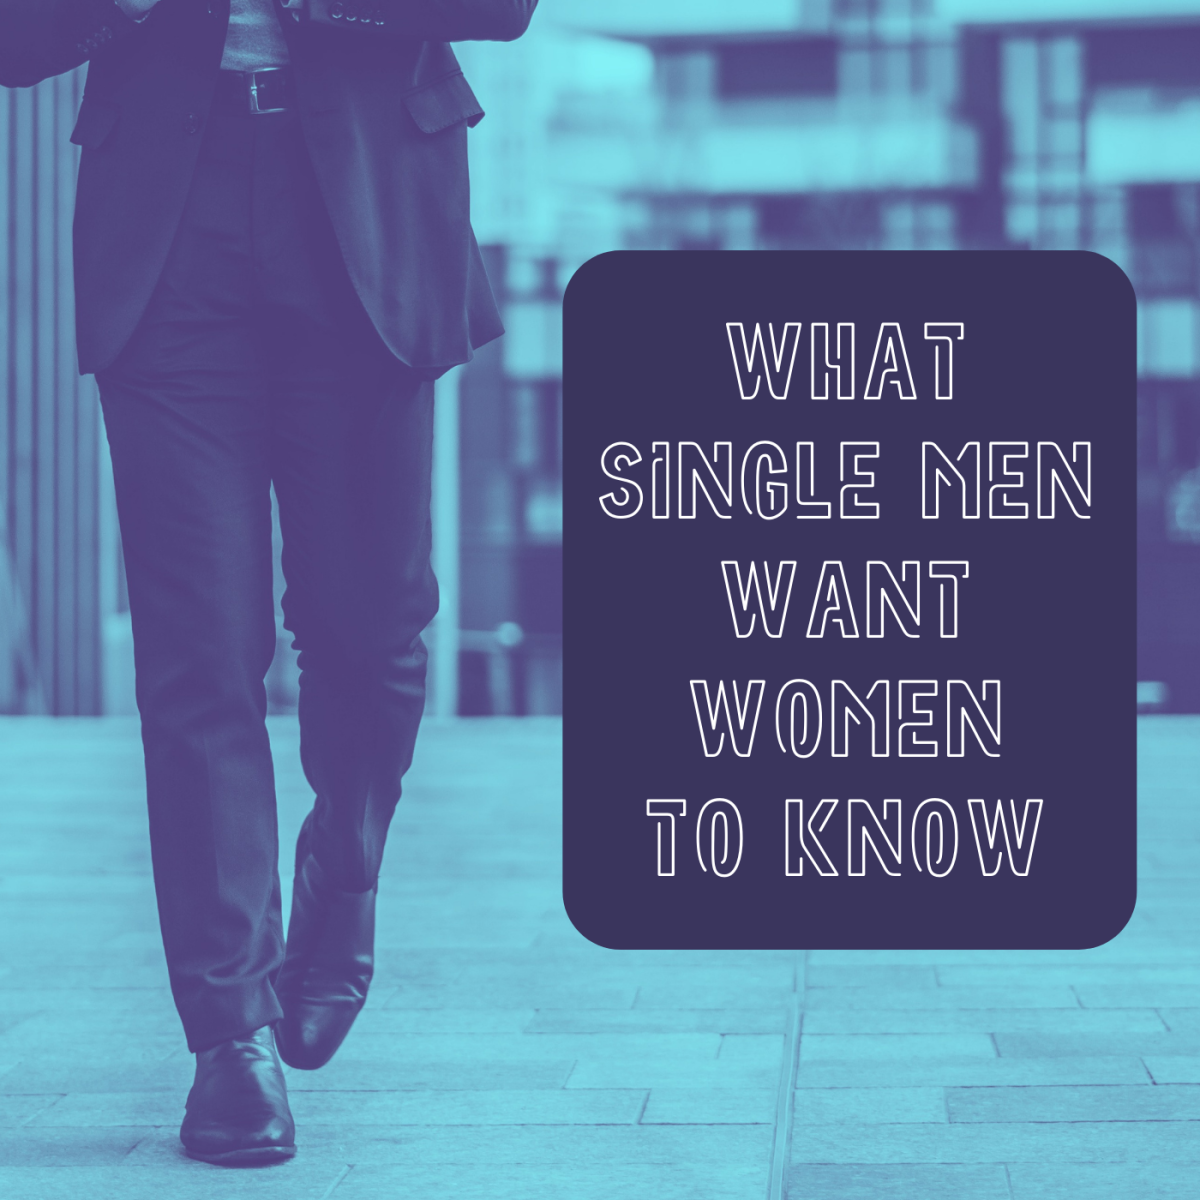 Here are 25 things that single men wish women knew.